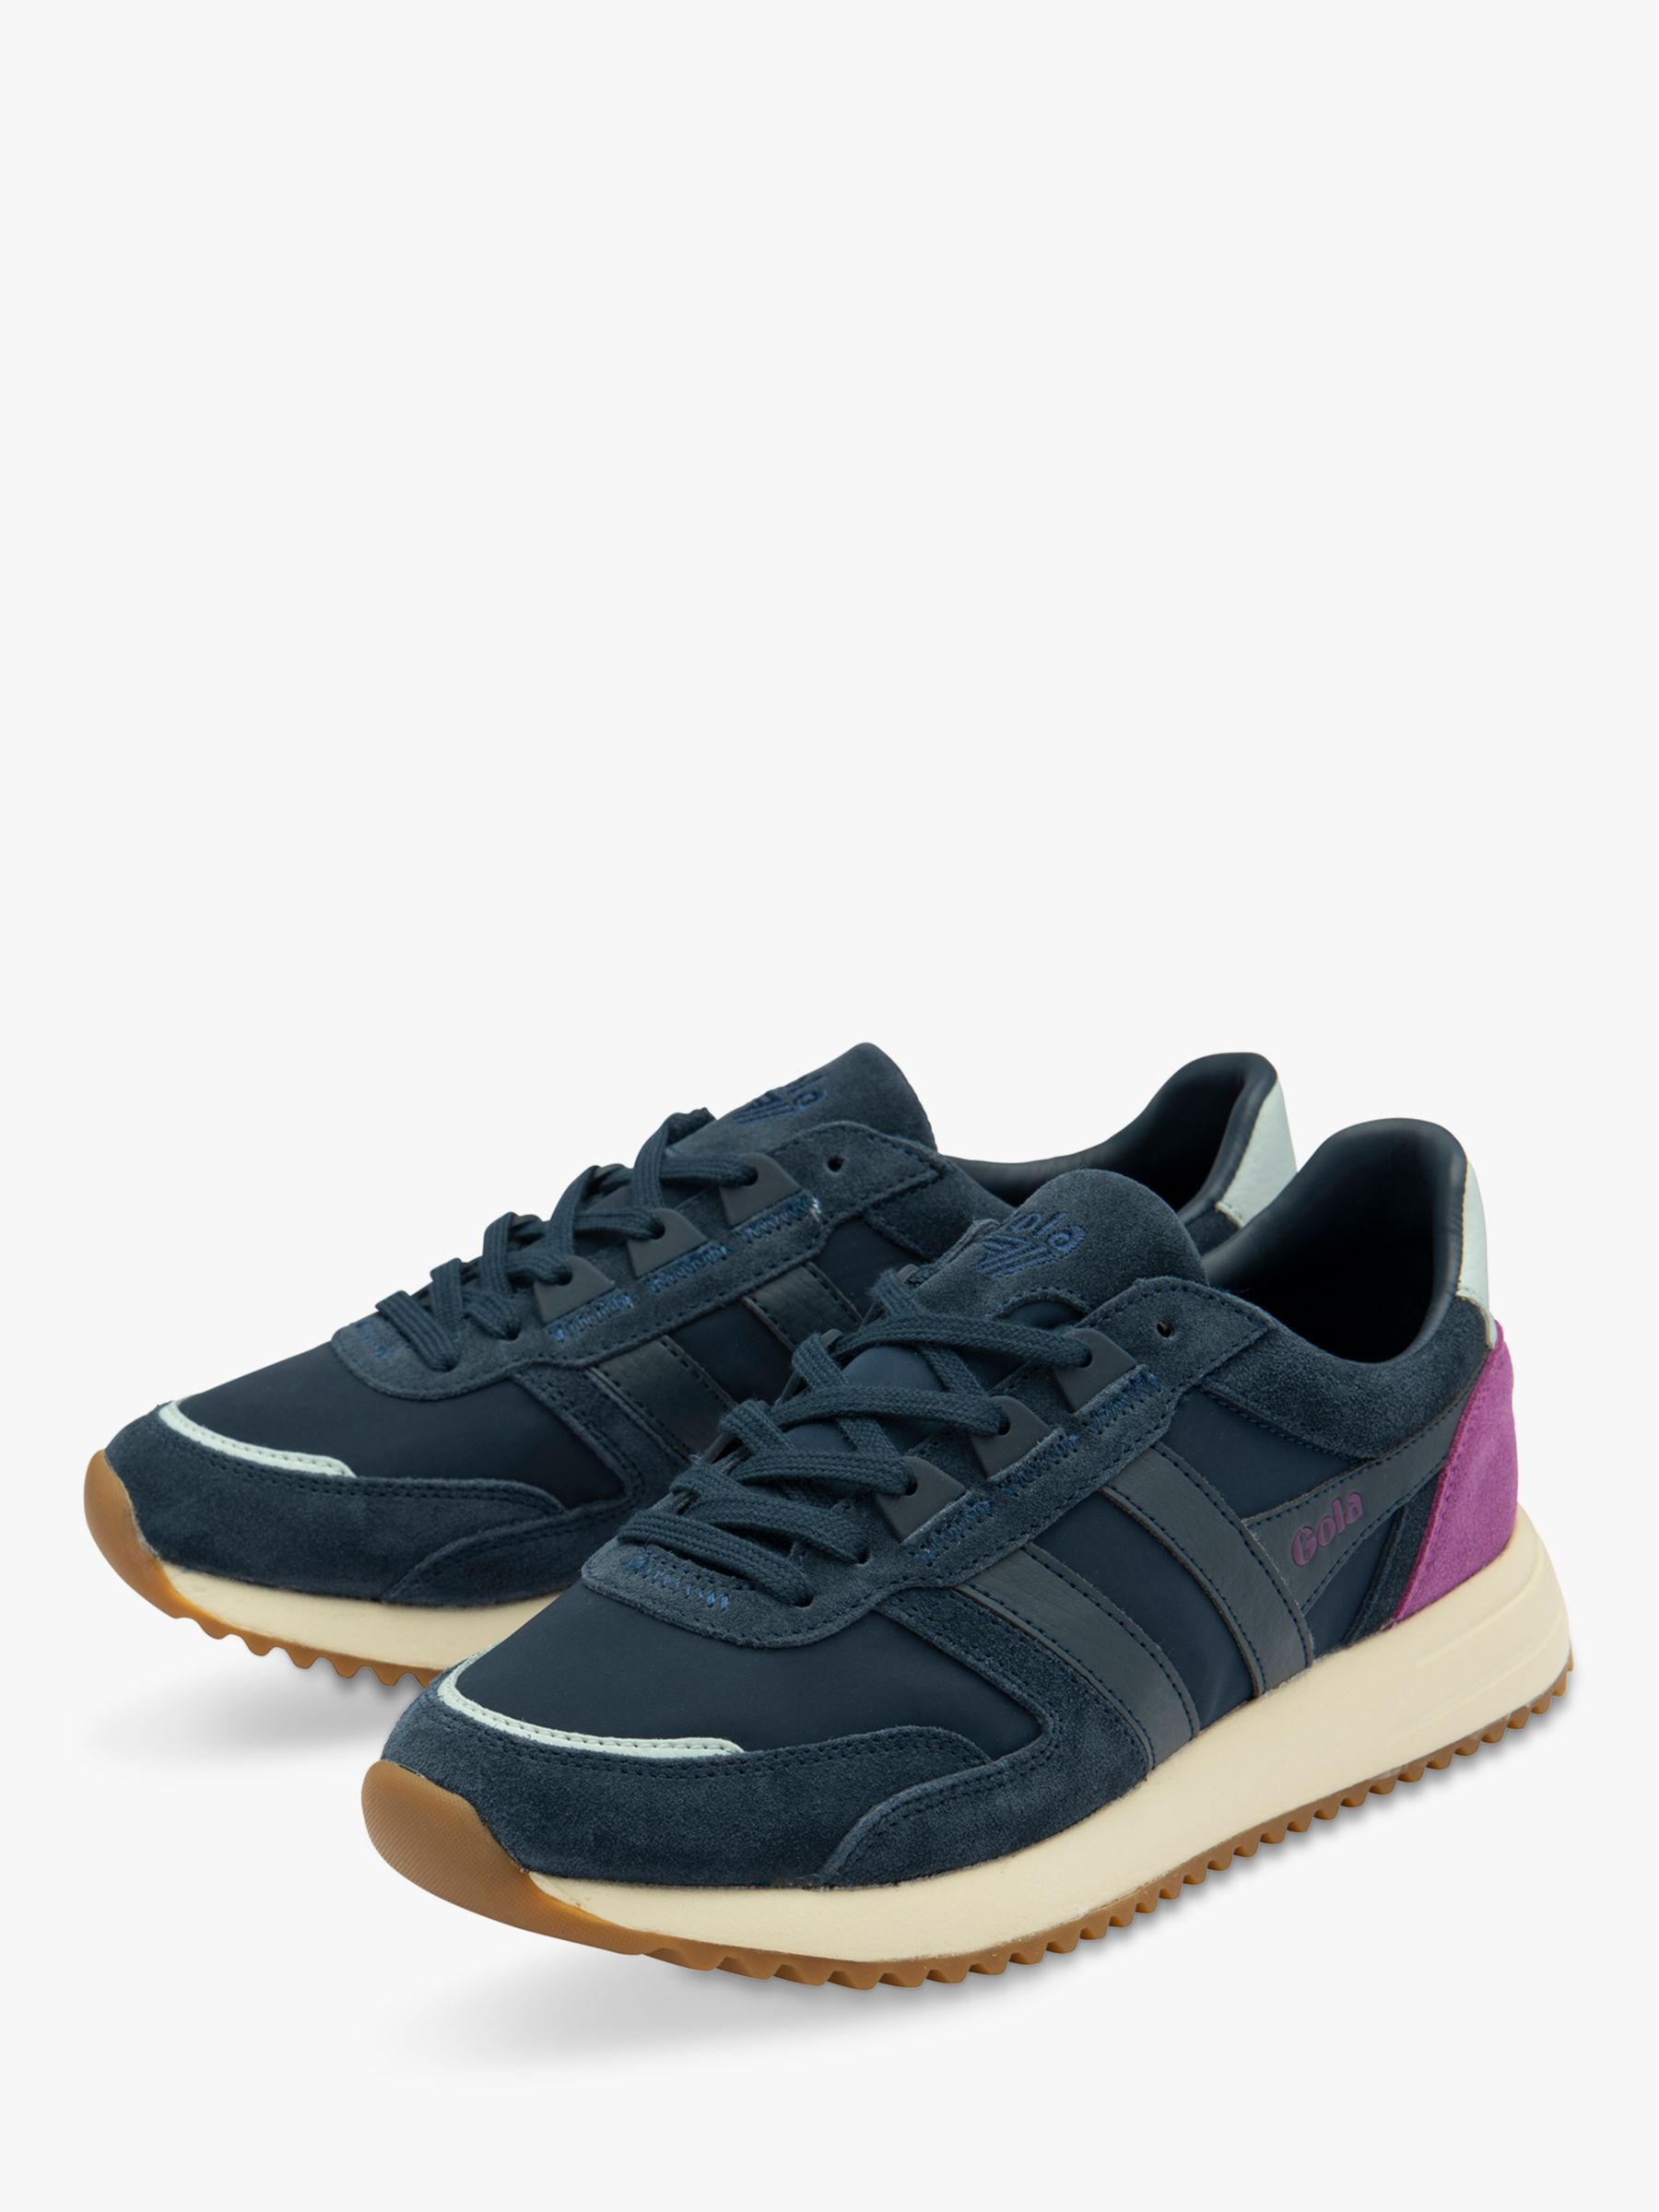 Buy Gola Classics Chicago Textile Trainers, Navy/Ice Blue Online at johnlewis.com